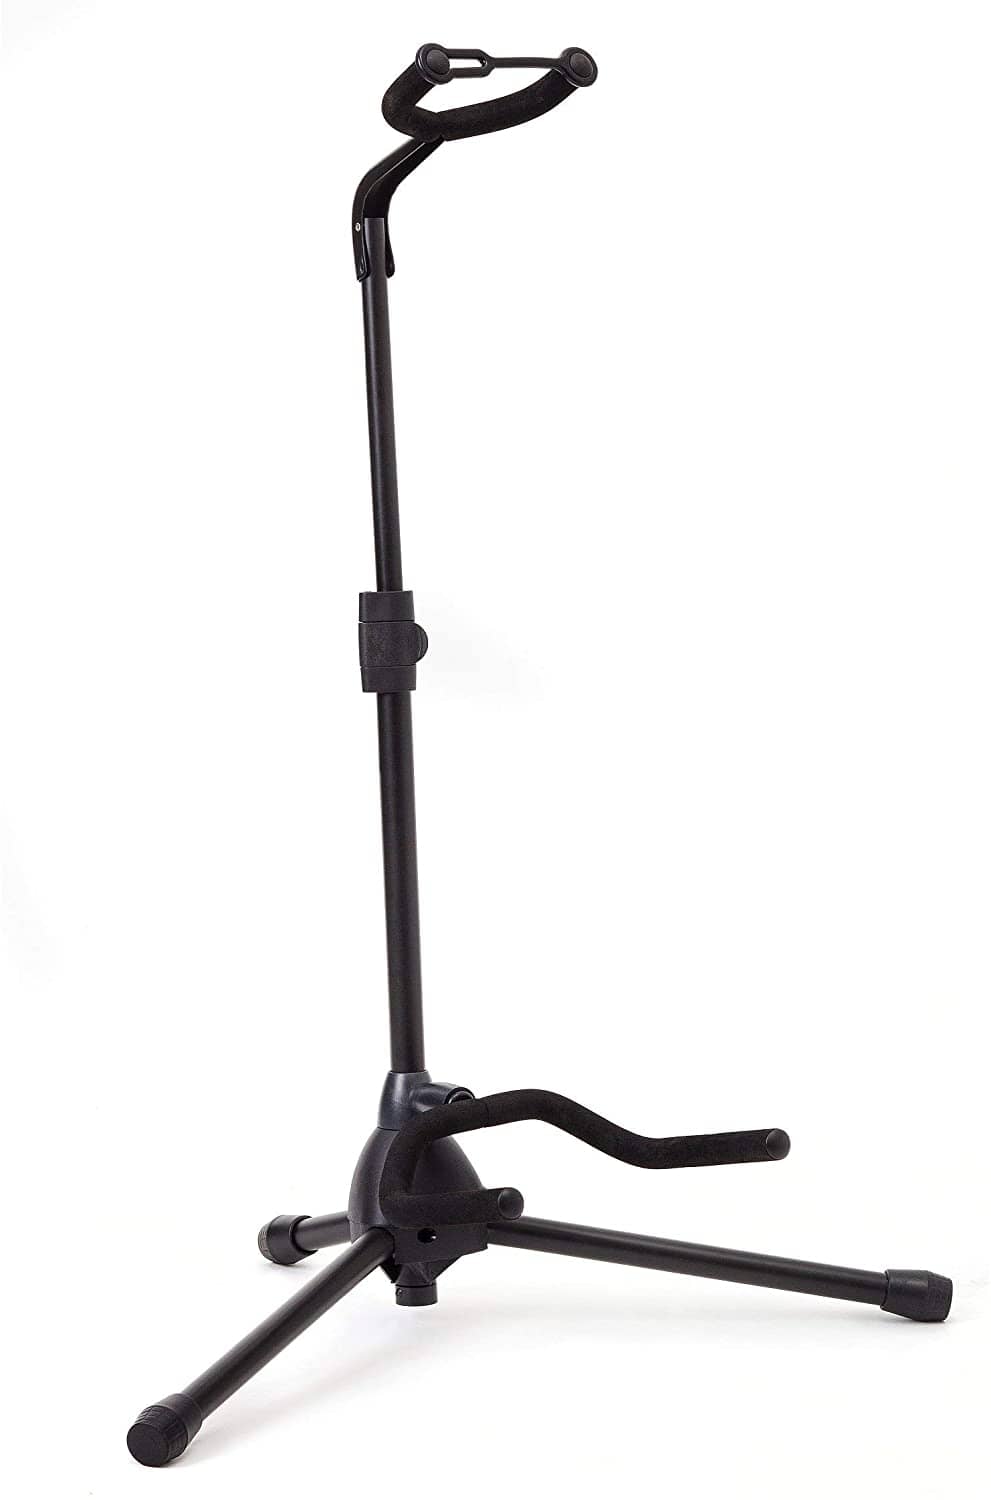 Universal Guitar Stand by Hola! Music – Fits Acoustic, Classical, Electric, Bass Guitars, Mandolins, Banjos, Ukuleles and Other Stringed Instruments – Black 9